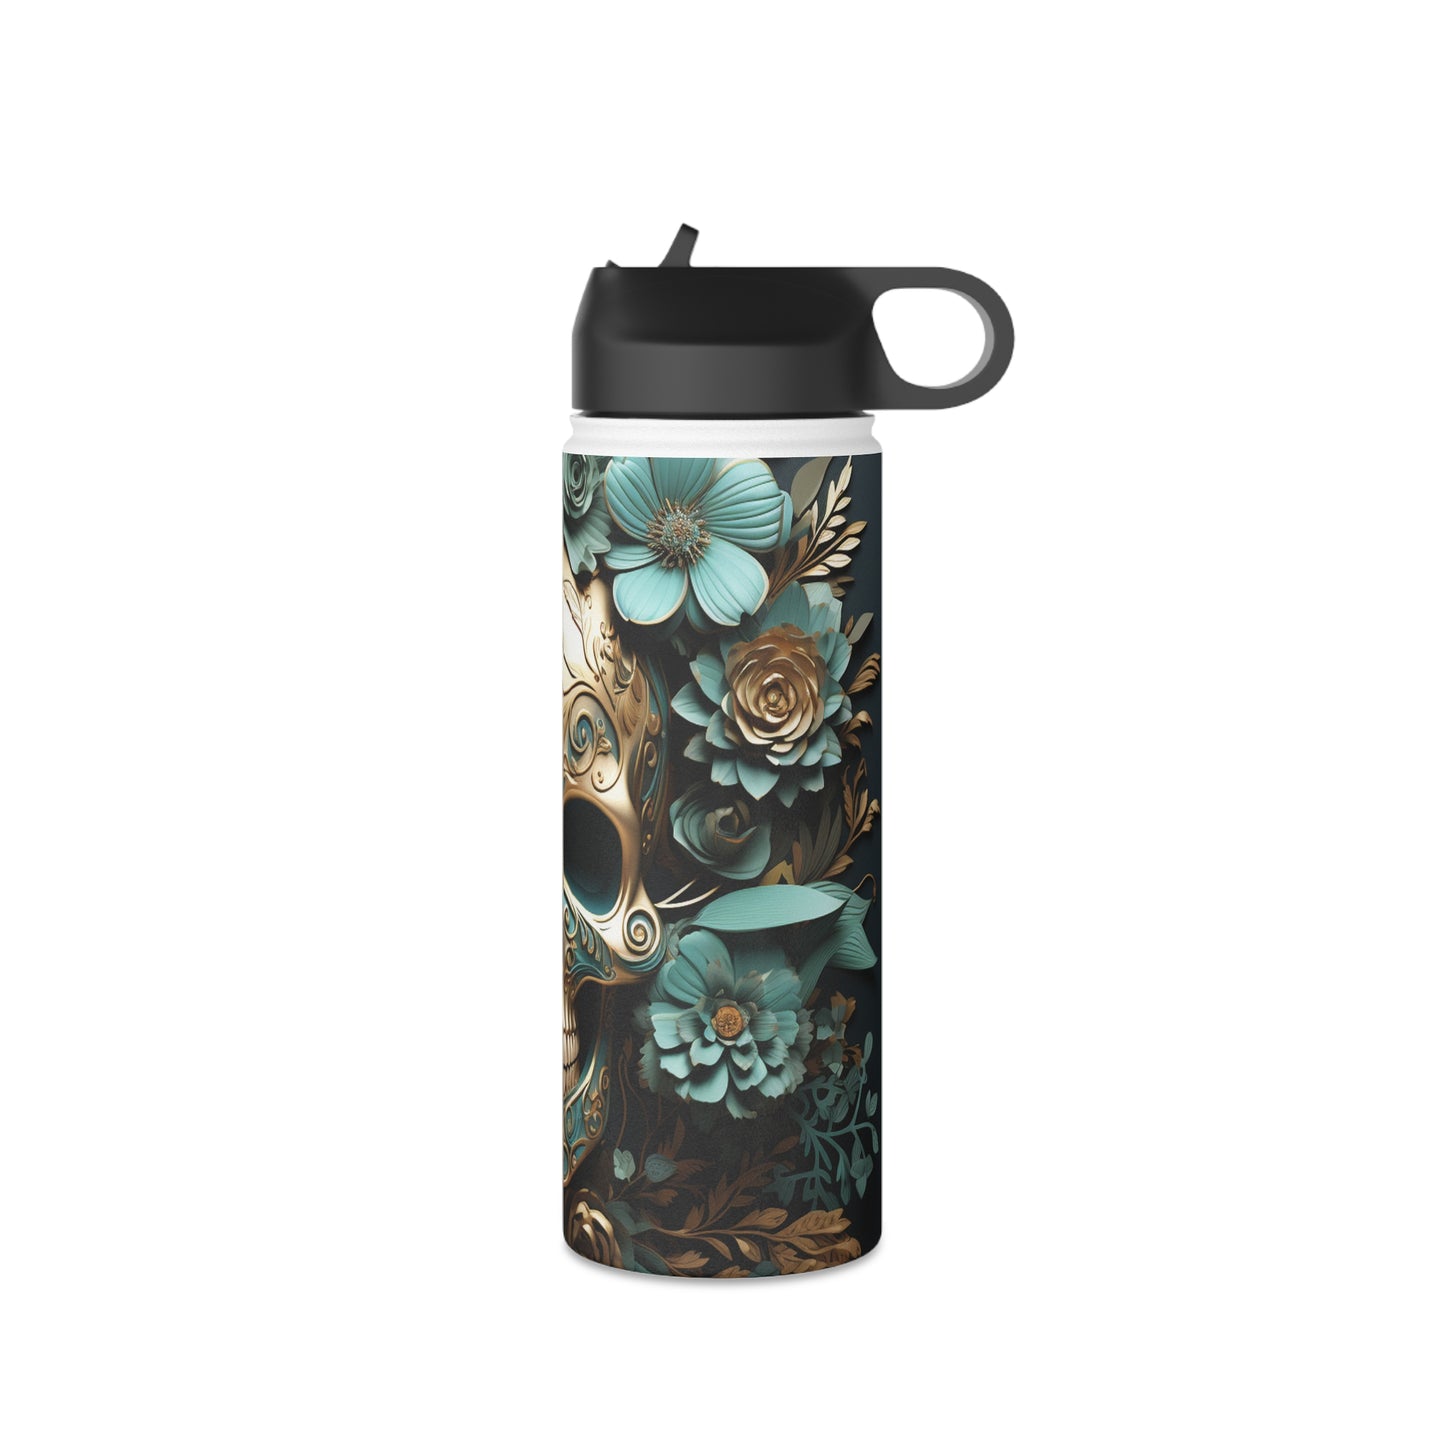 Skull Candy Gold and Teal Stainless Steel Water Bottle, Standard Lid